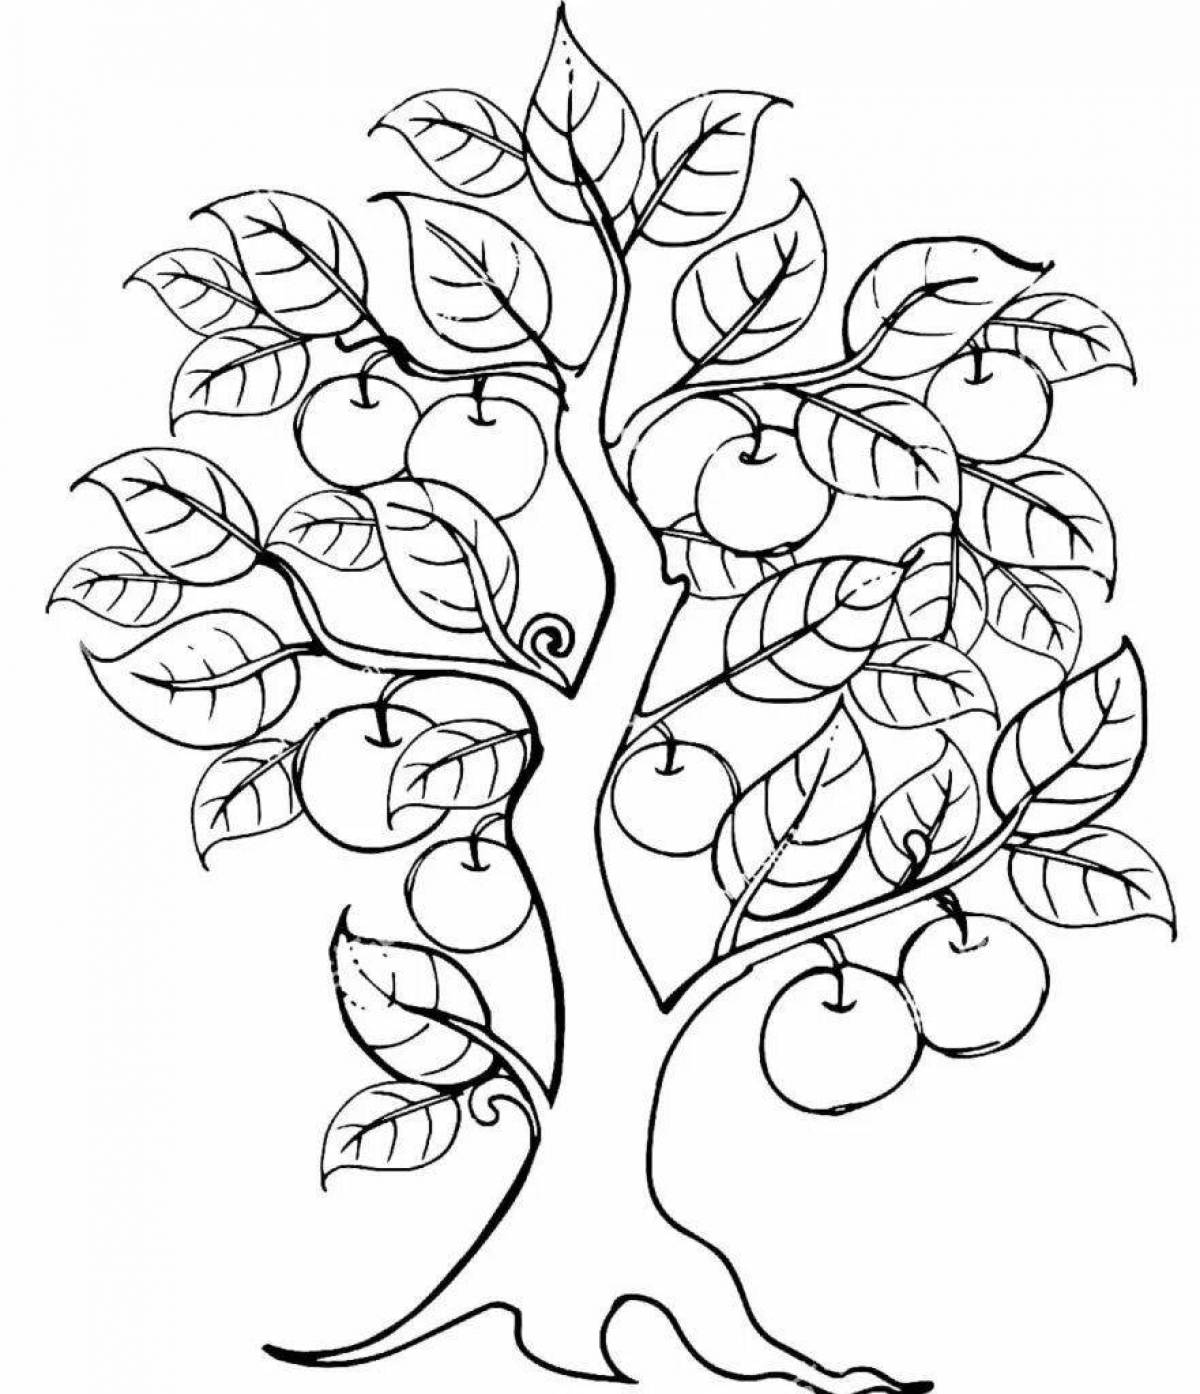 Brilliant coloring tree with apples